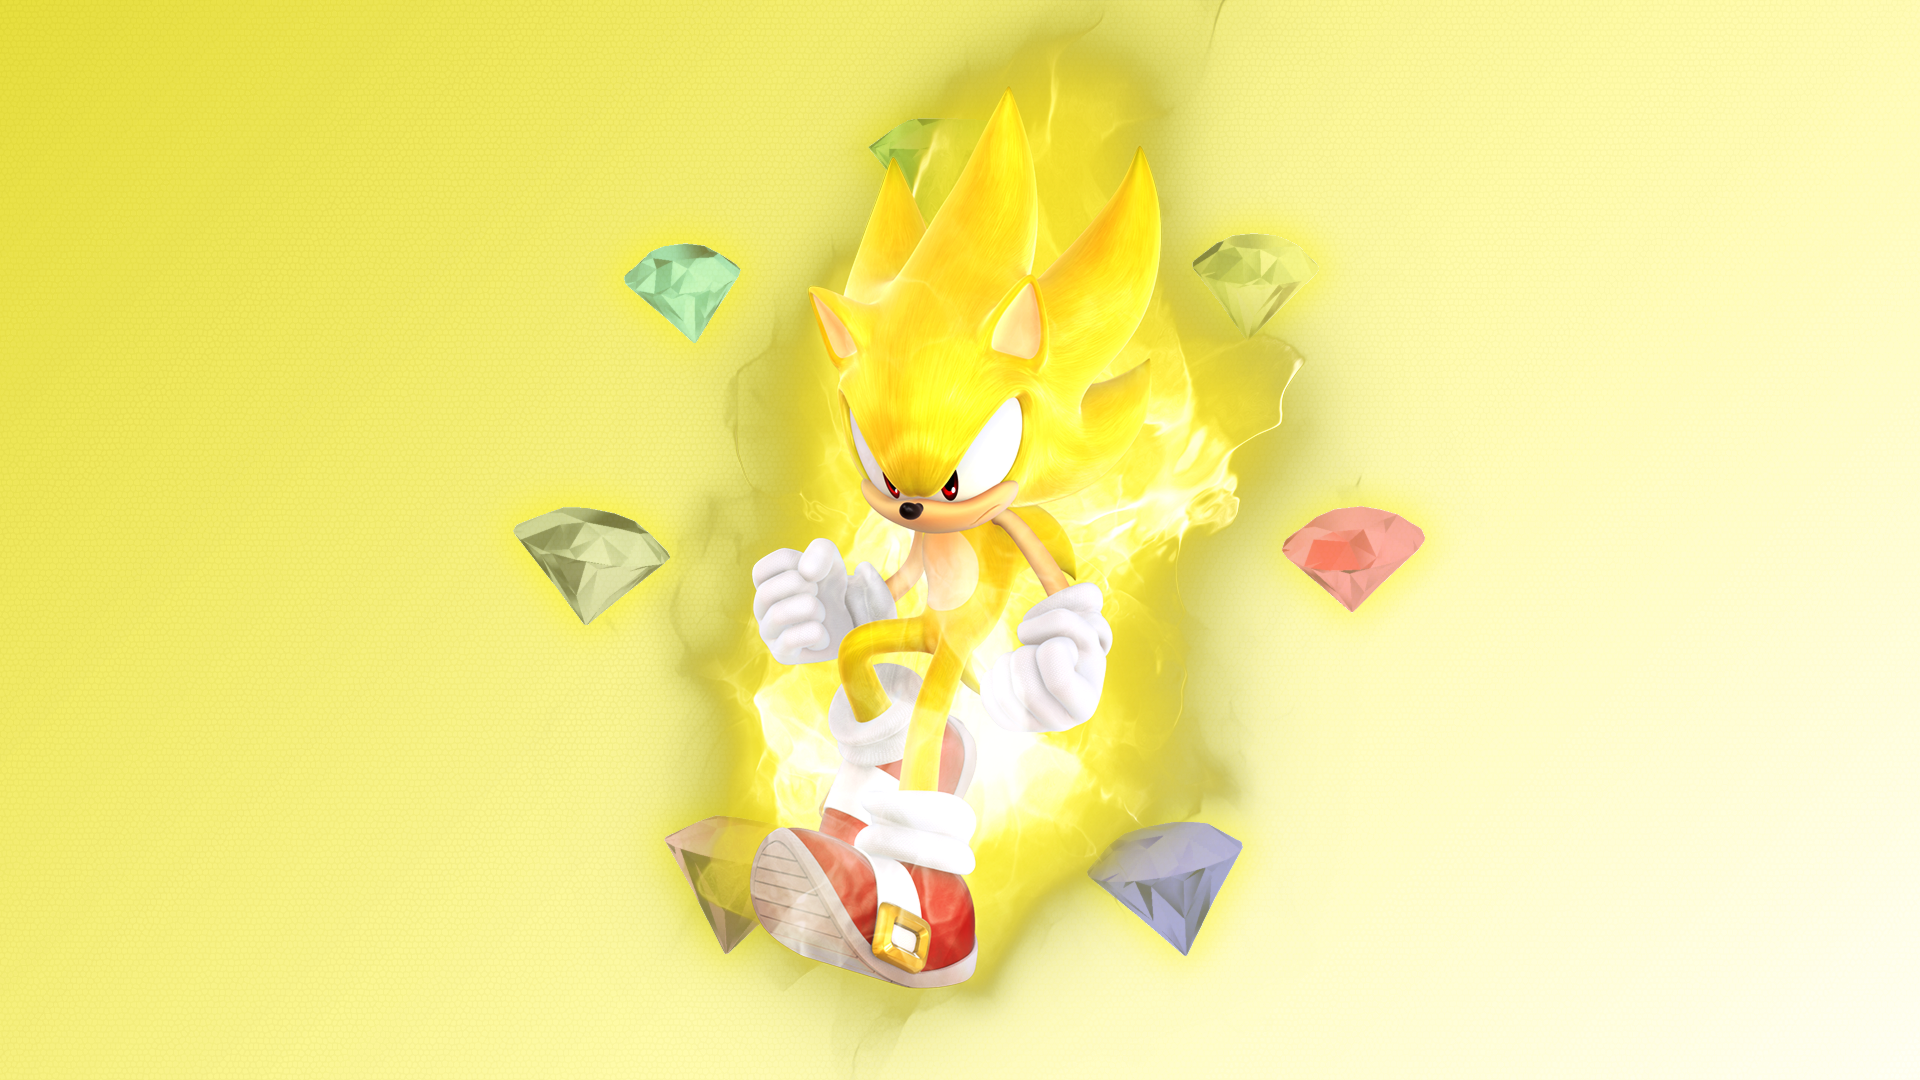 20+ Super Sonic HD Wallpapers and Backgrounds